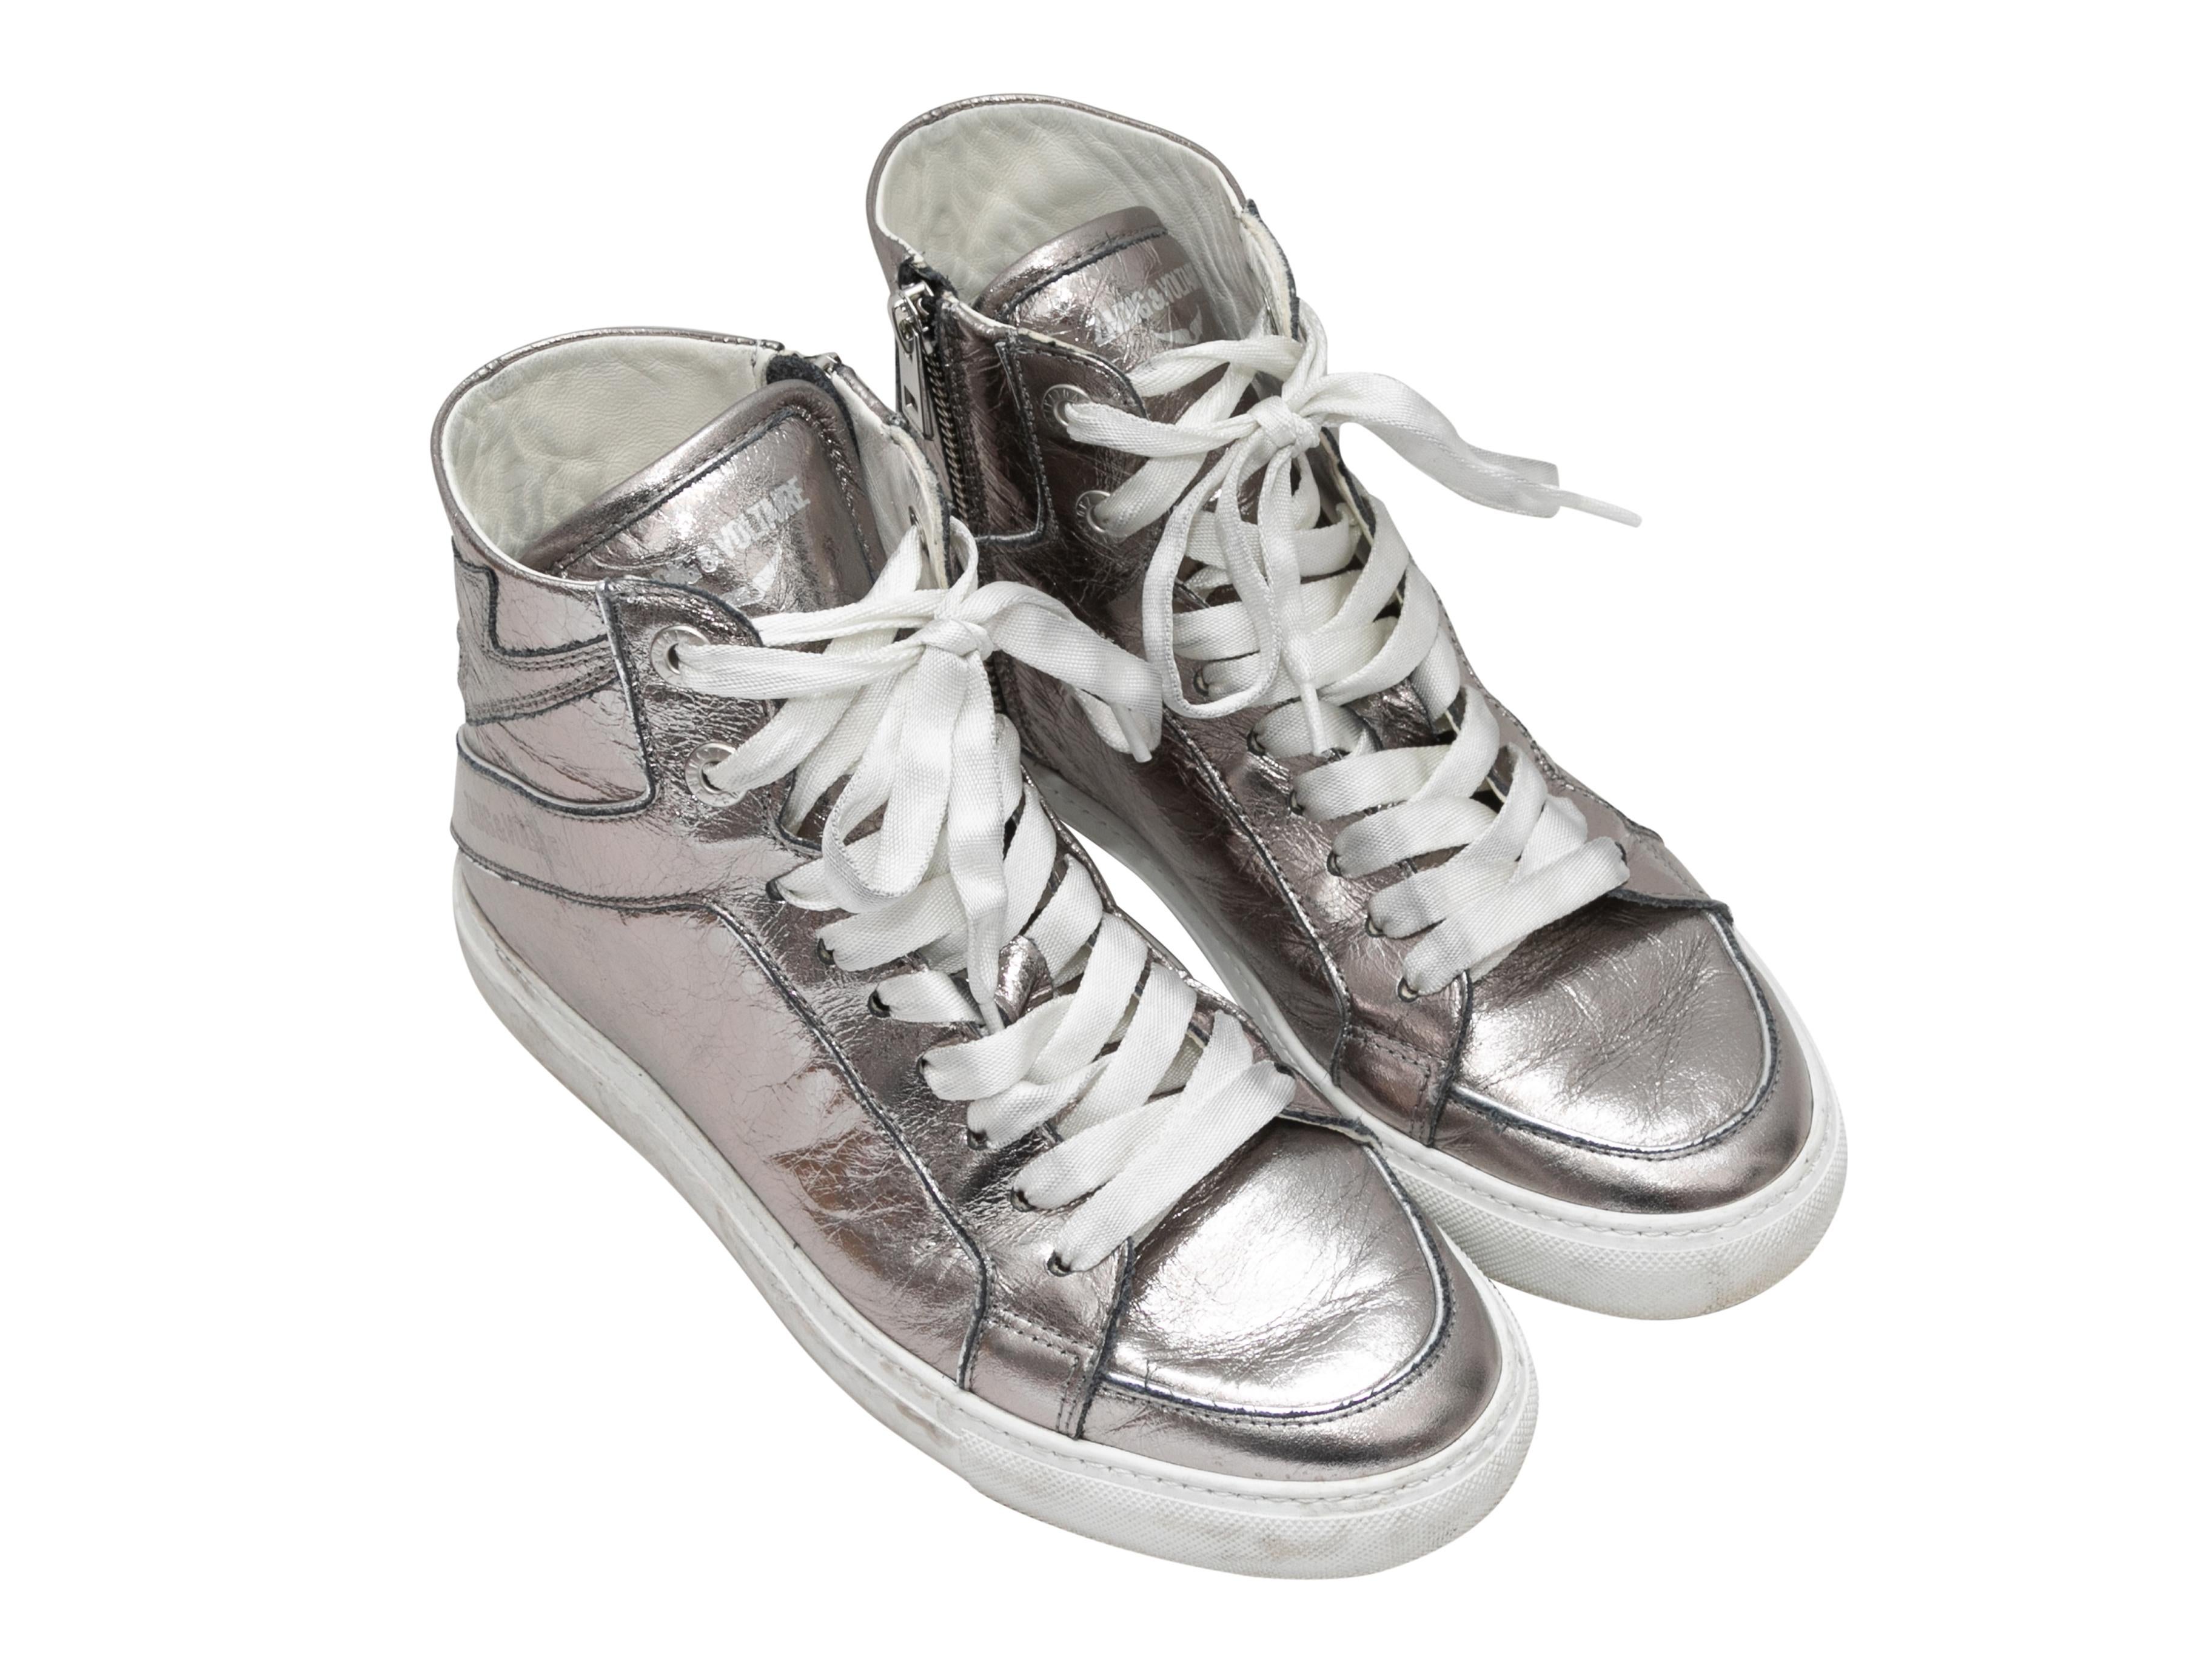 Silver metallic leather high-top sneakers by Zadig & Voltaire. Rubber soles. Lace-up detailing at tops. Zip closures at inner sides. 4.5